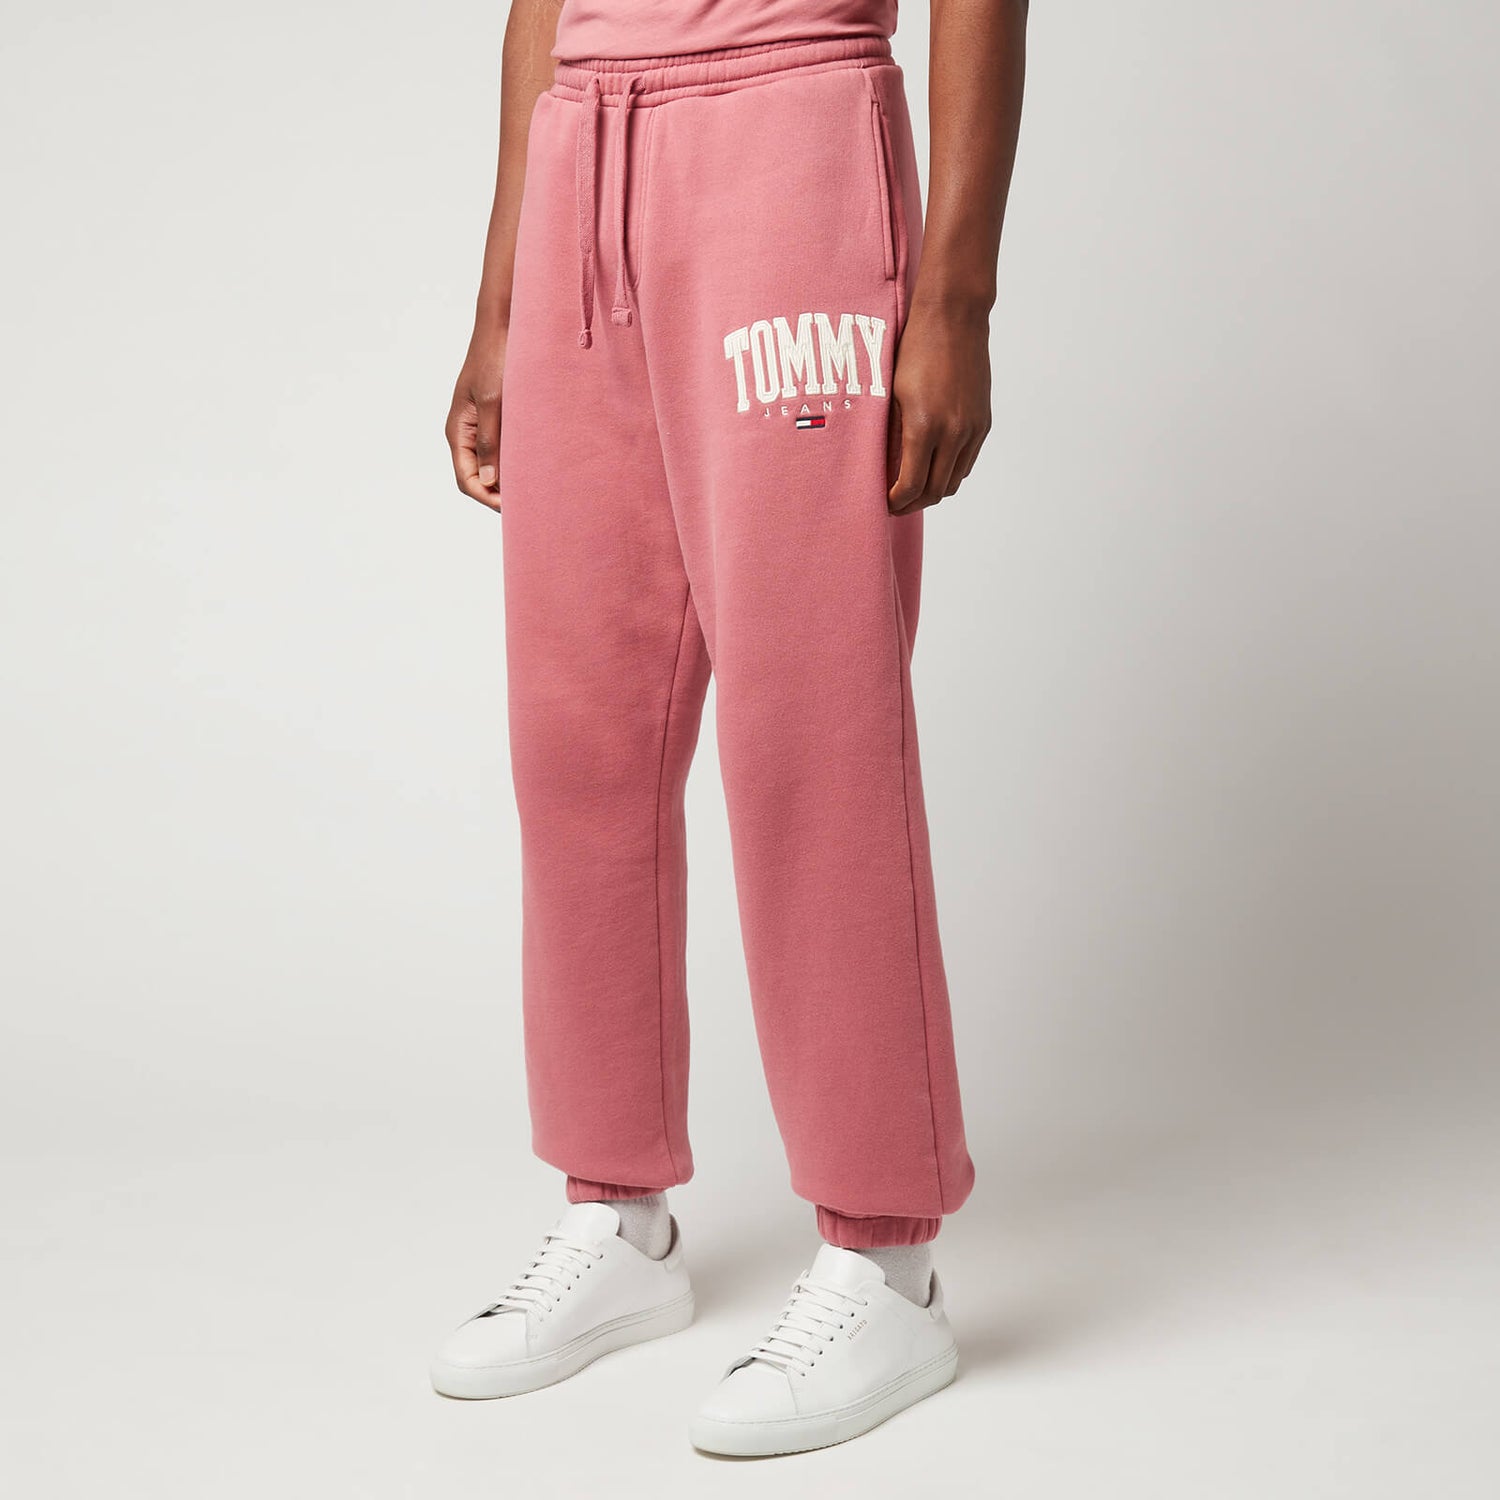 Tommy Jeans Men's Collegiate Relaxed Fit Sweatpants - Moss Rose - M